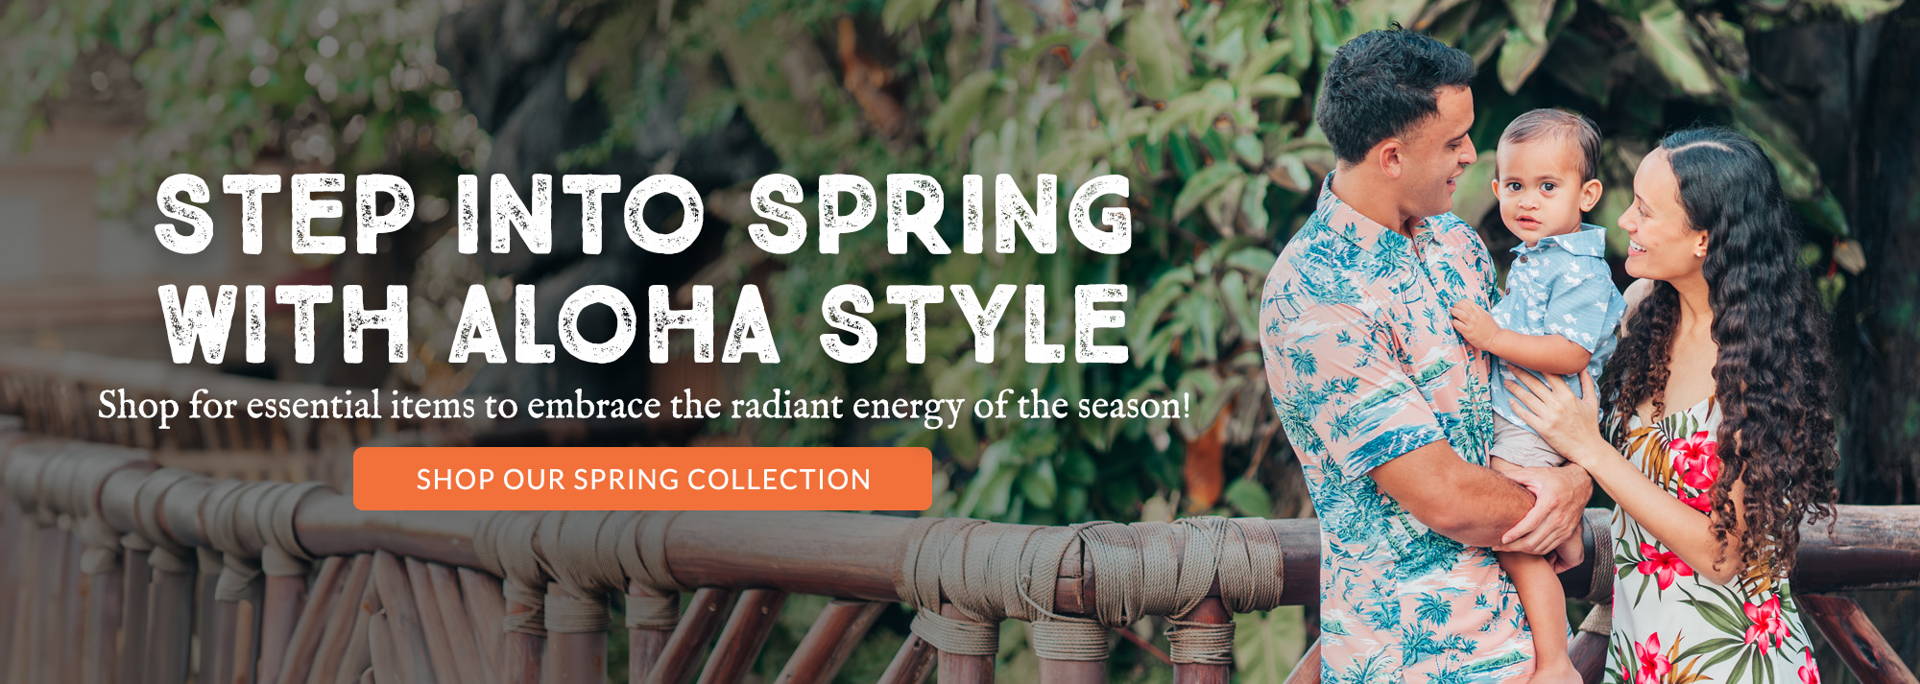 Embrace the vibrant spirit of spring with our island collection at the Hawaii store. Discover essential items that radiate the energy of the season. Shop now to step into spring in style!